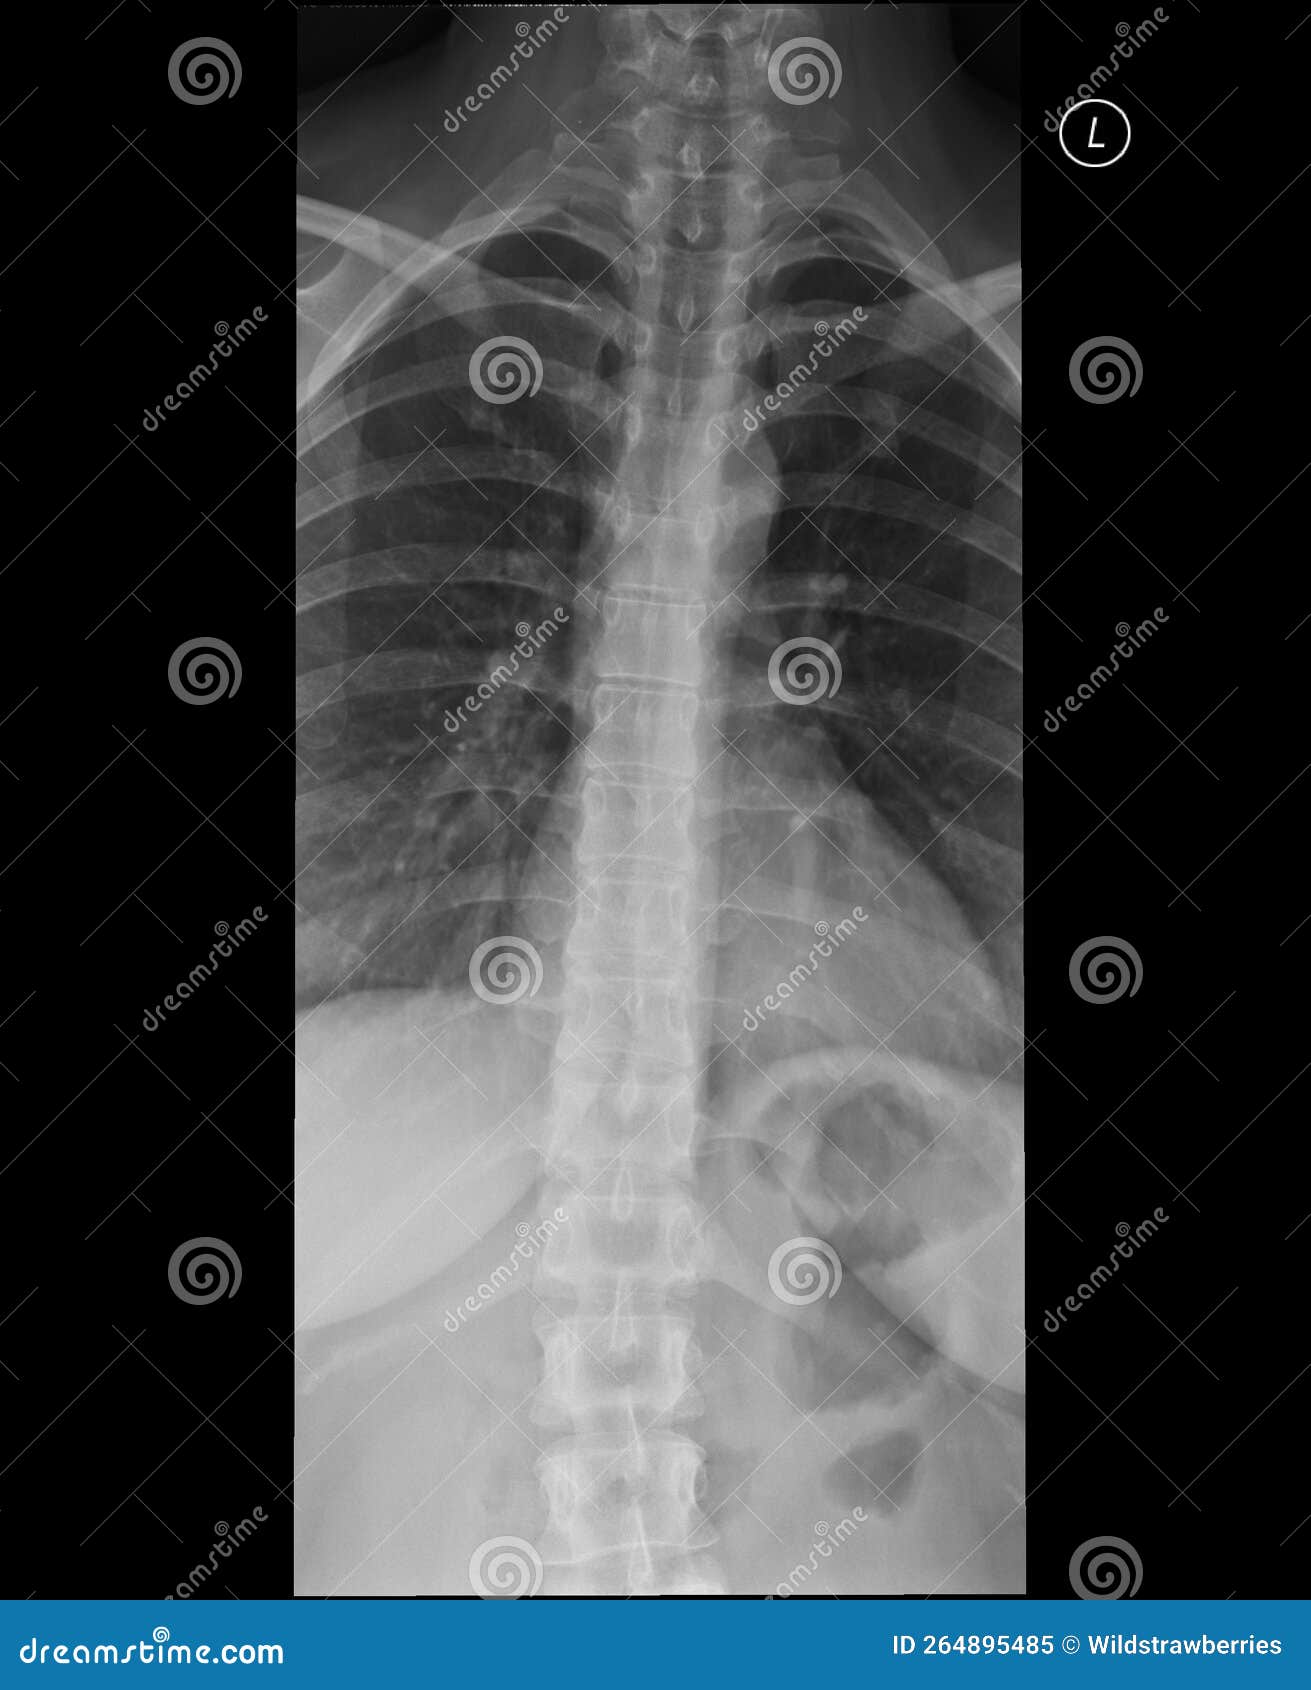 thoracic spine x-ray. anteroposterior view.